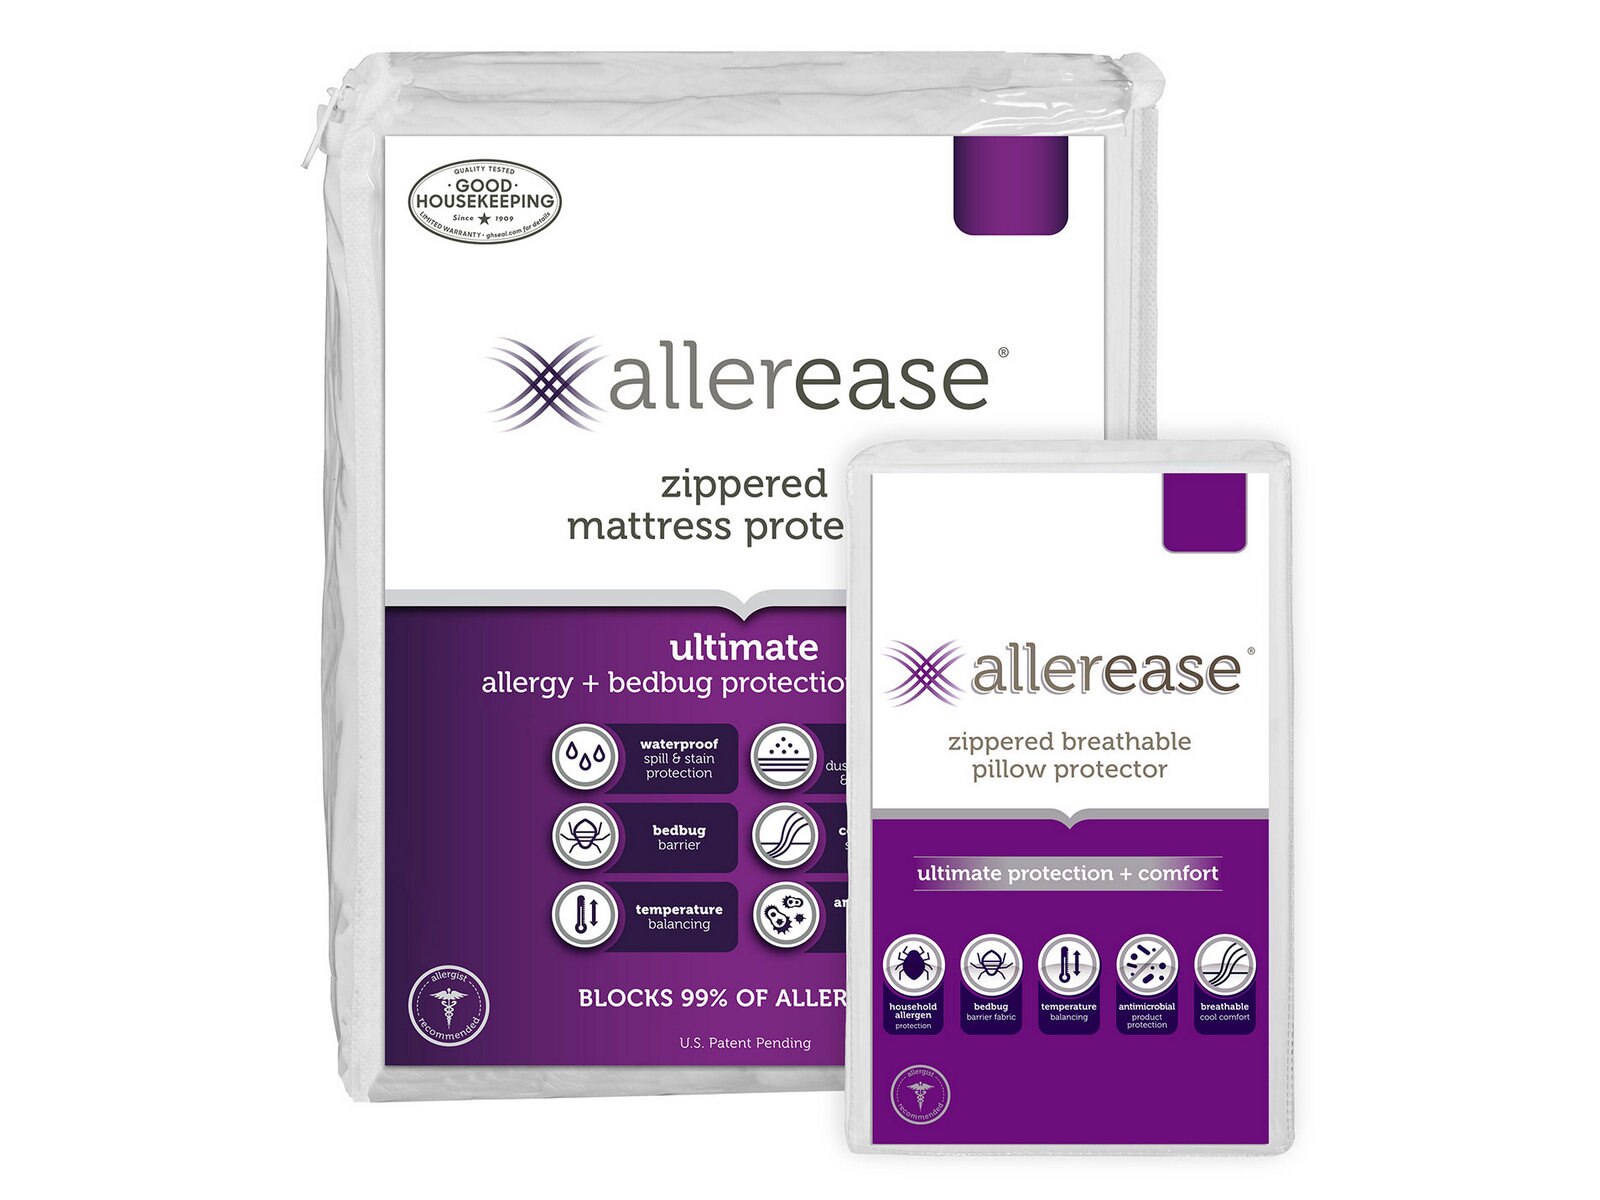 allerease mattress protector ultimate protection plus comfort reviews